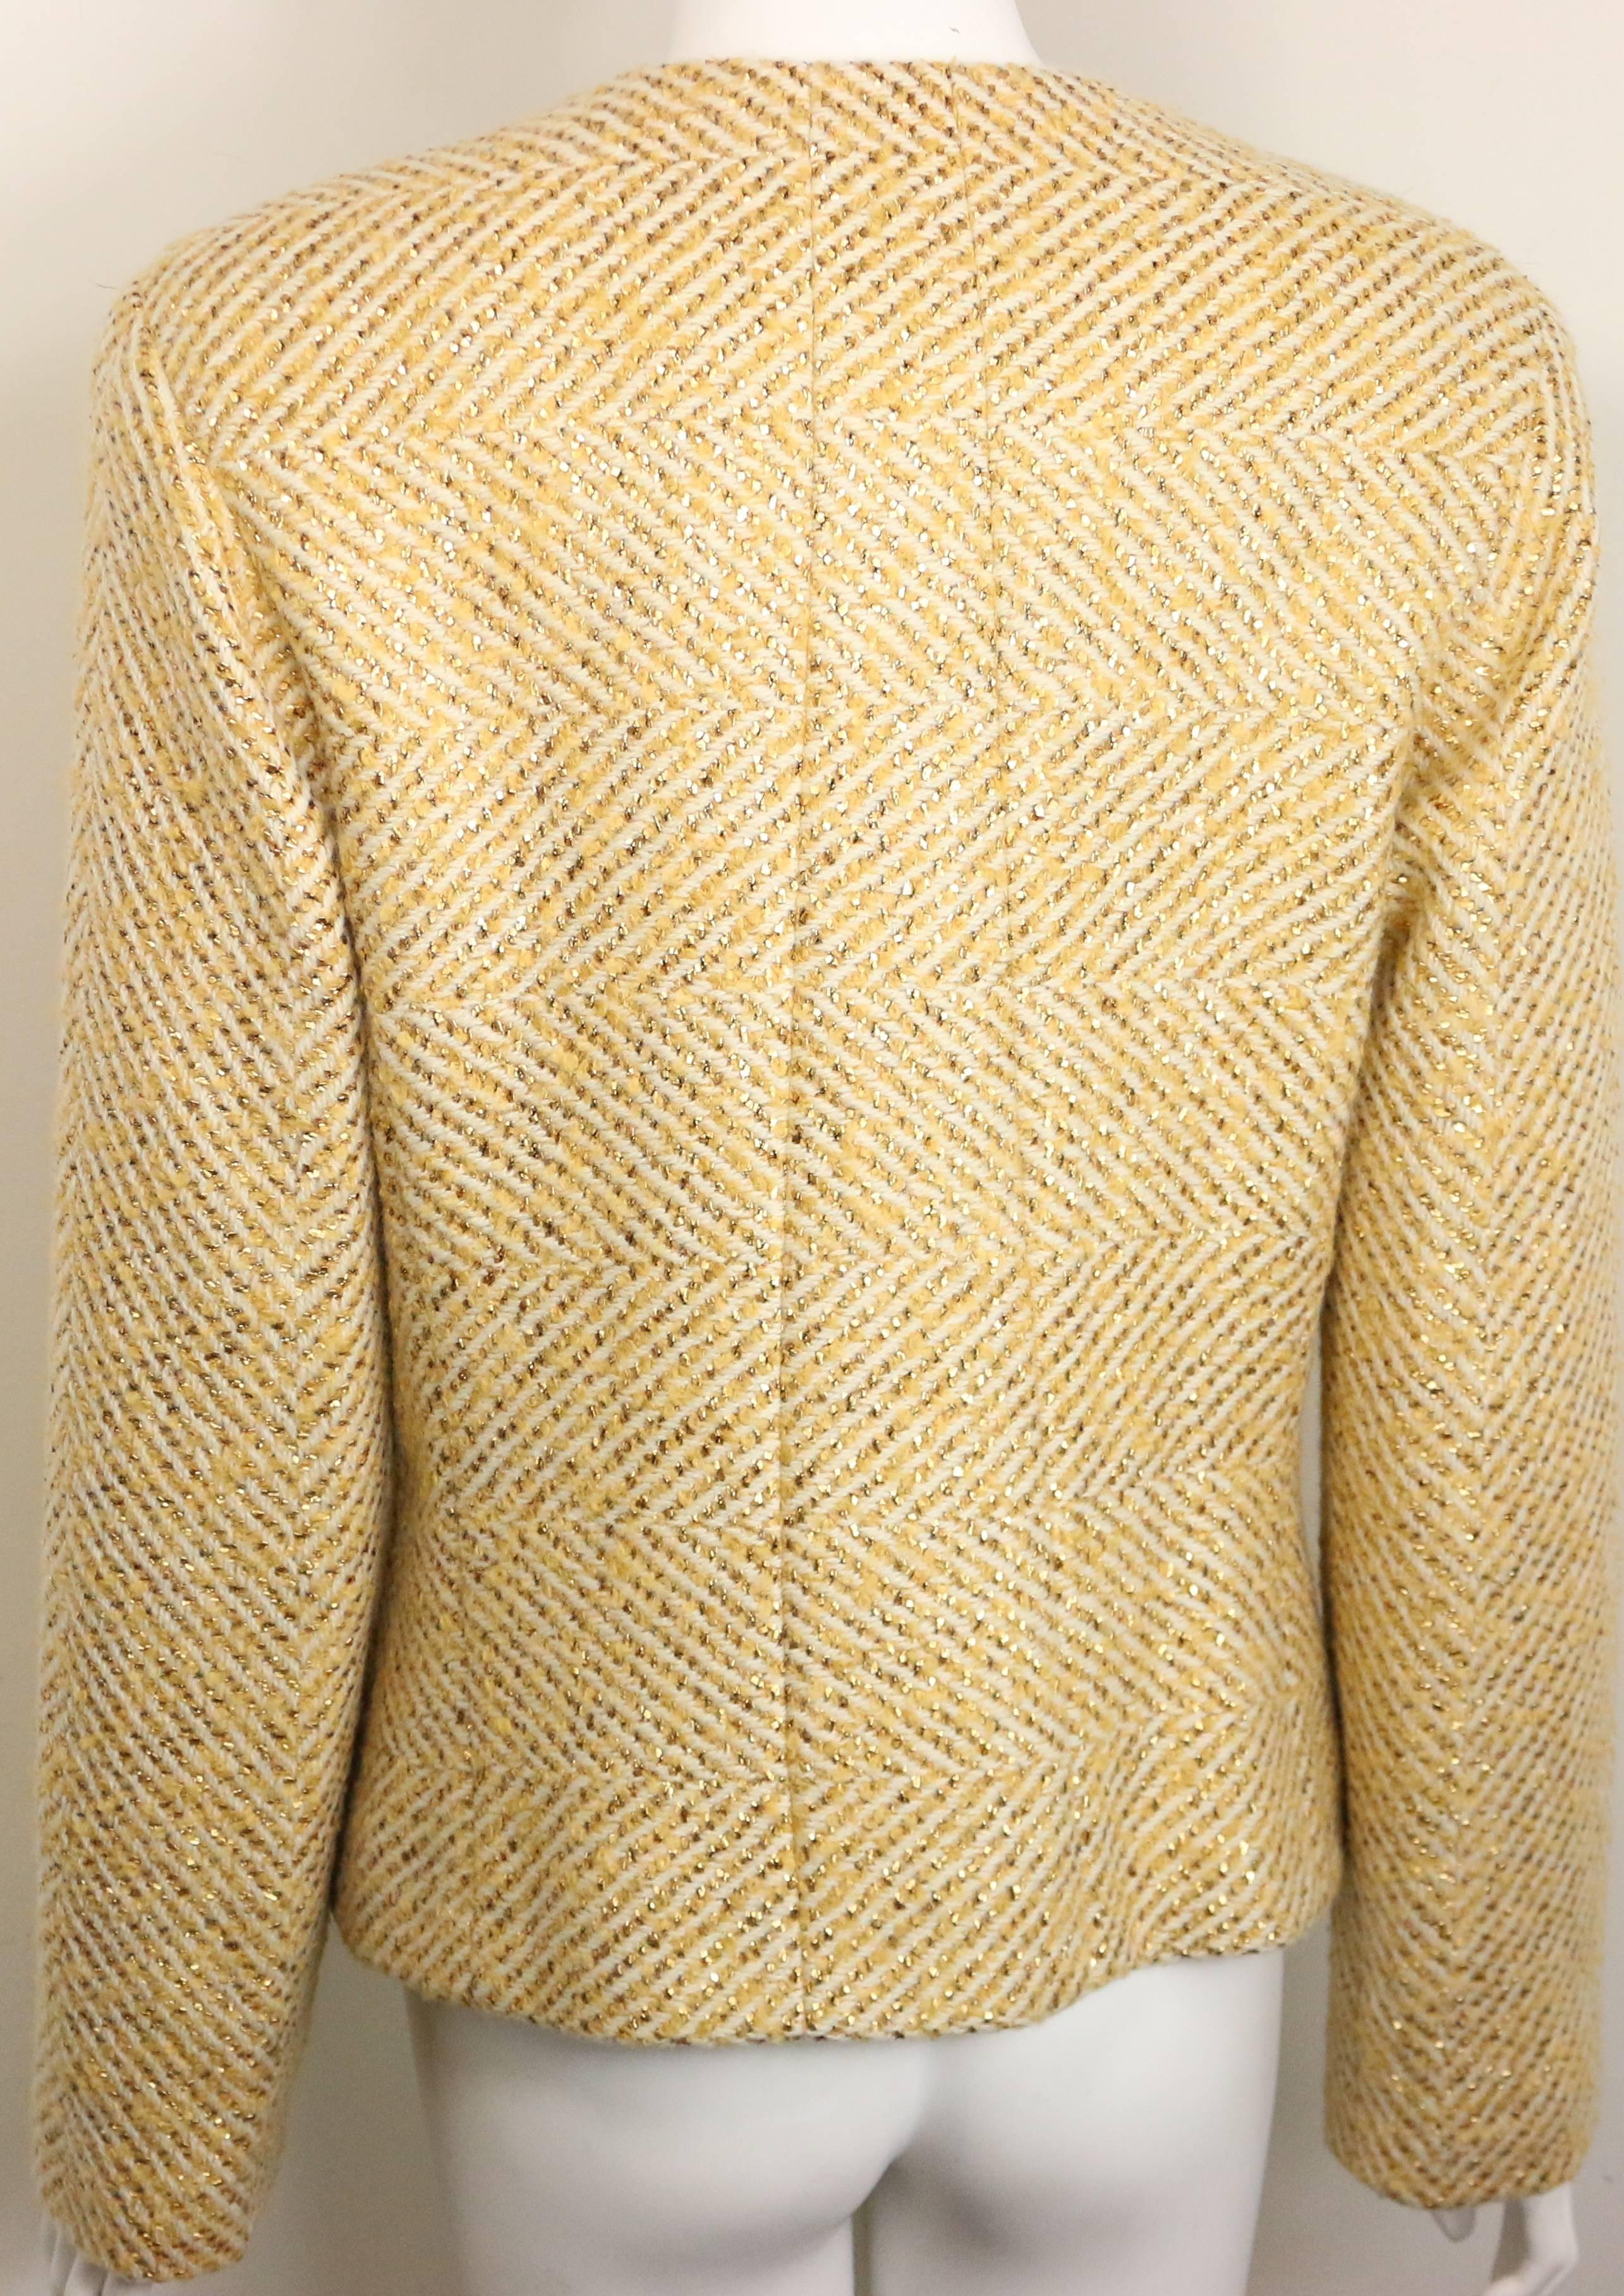 - Vintage Chanel gold-tone metallic glitter cream wool chevron tweed shawl jacket from fall 2000 collection. 

- Featuring four flattened gold-tone metal 